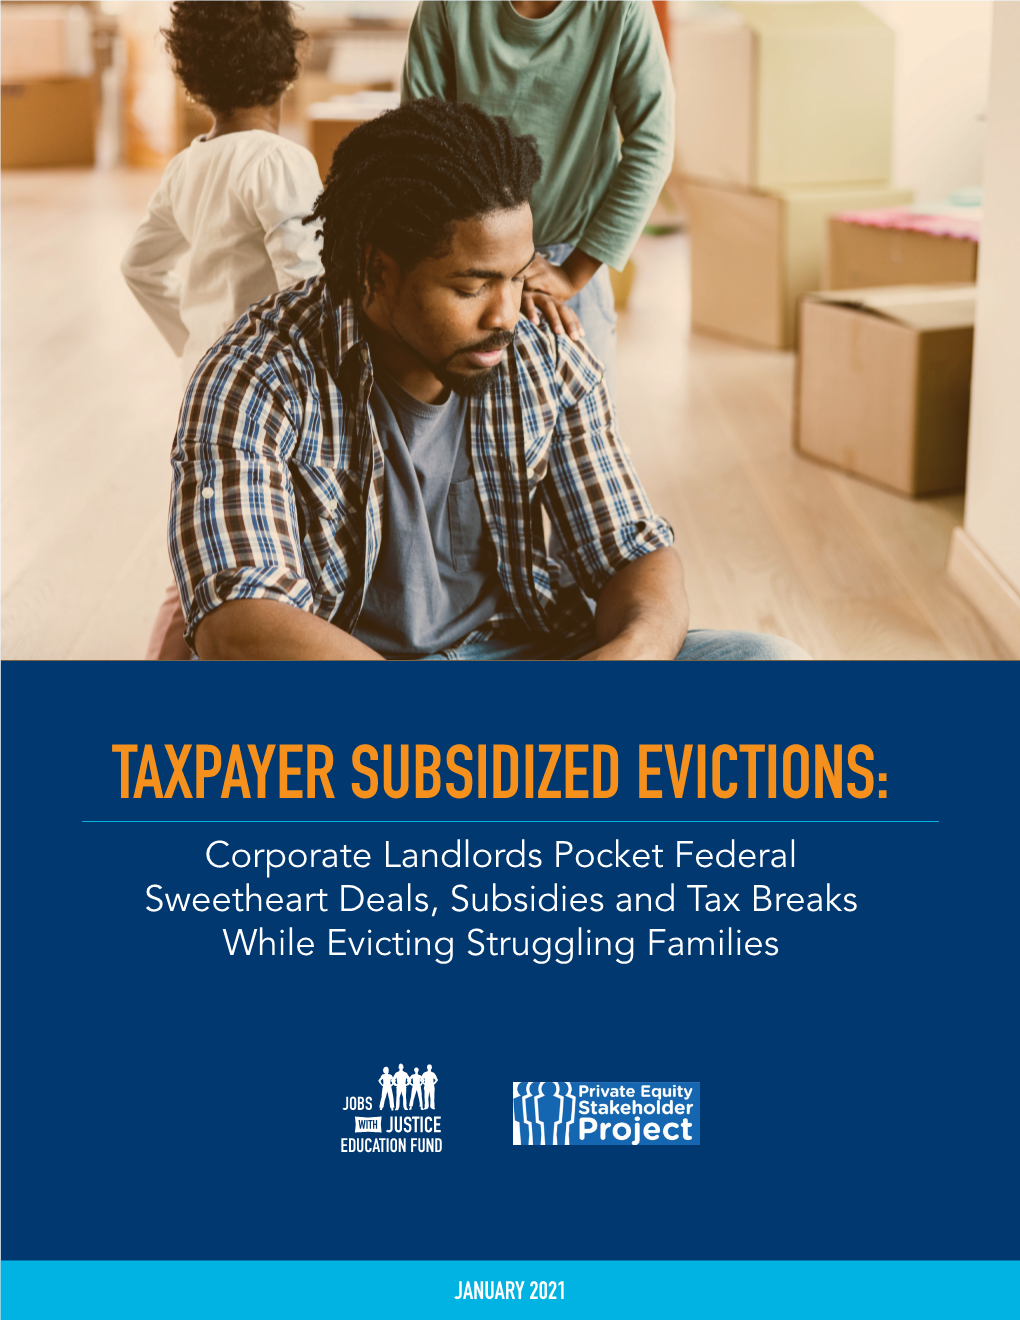 TAXPAYER SUBSIDIZED EVICTIONS: Corporate Landlords Pocket Federal Sweetheart Deals, Subsidies and Tax Breaks While Evicting Struggling Families